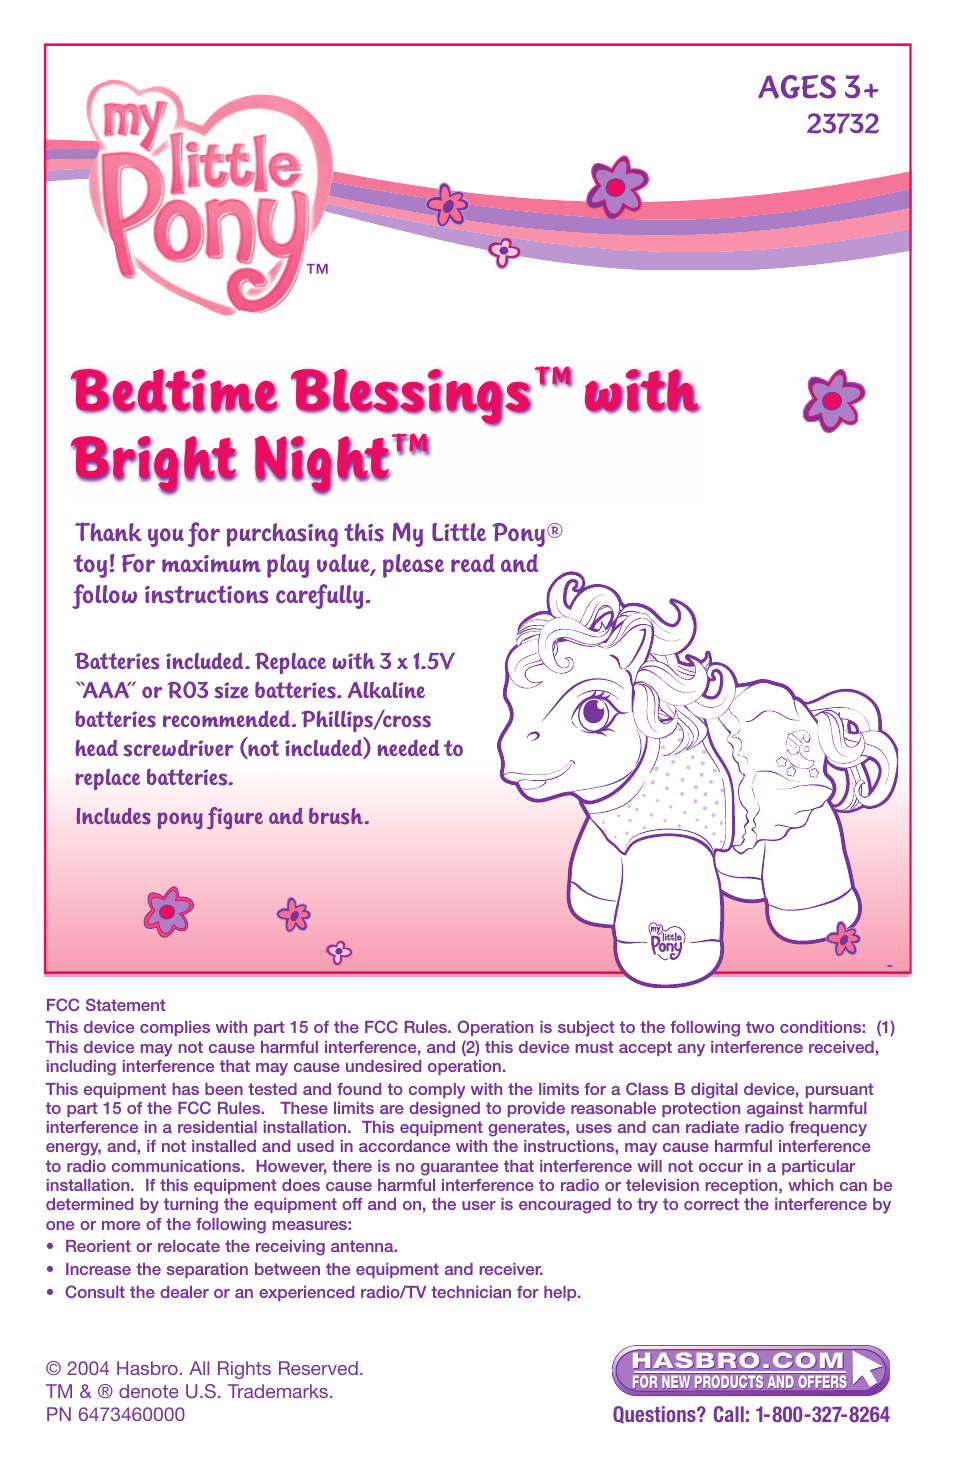 Bedtime Blessings with Bright Night 23732